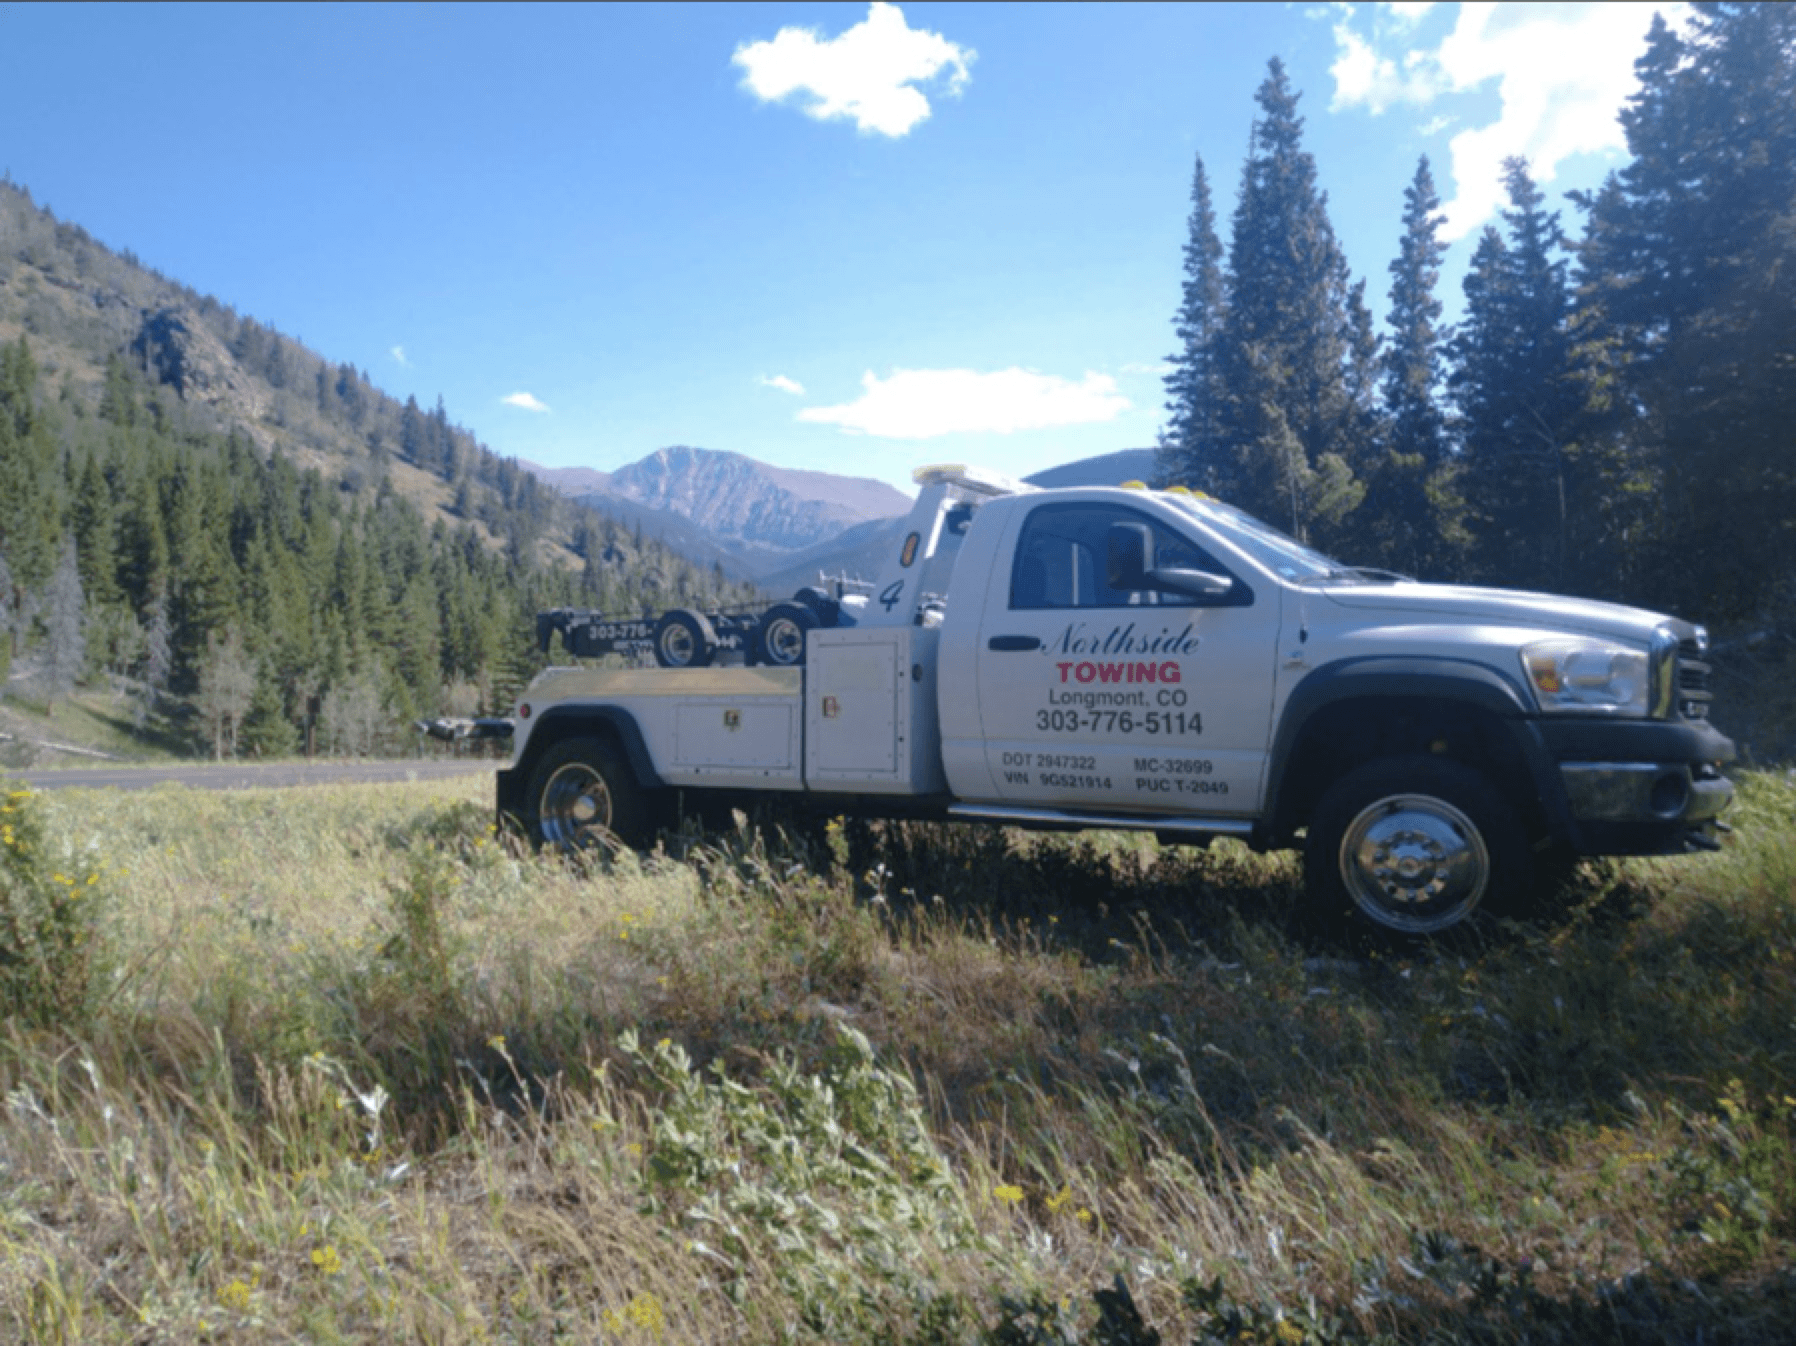 Northside Towing, towing company case study